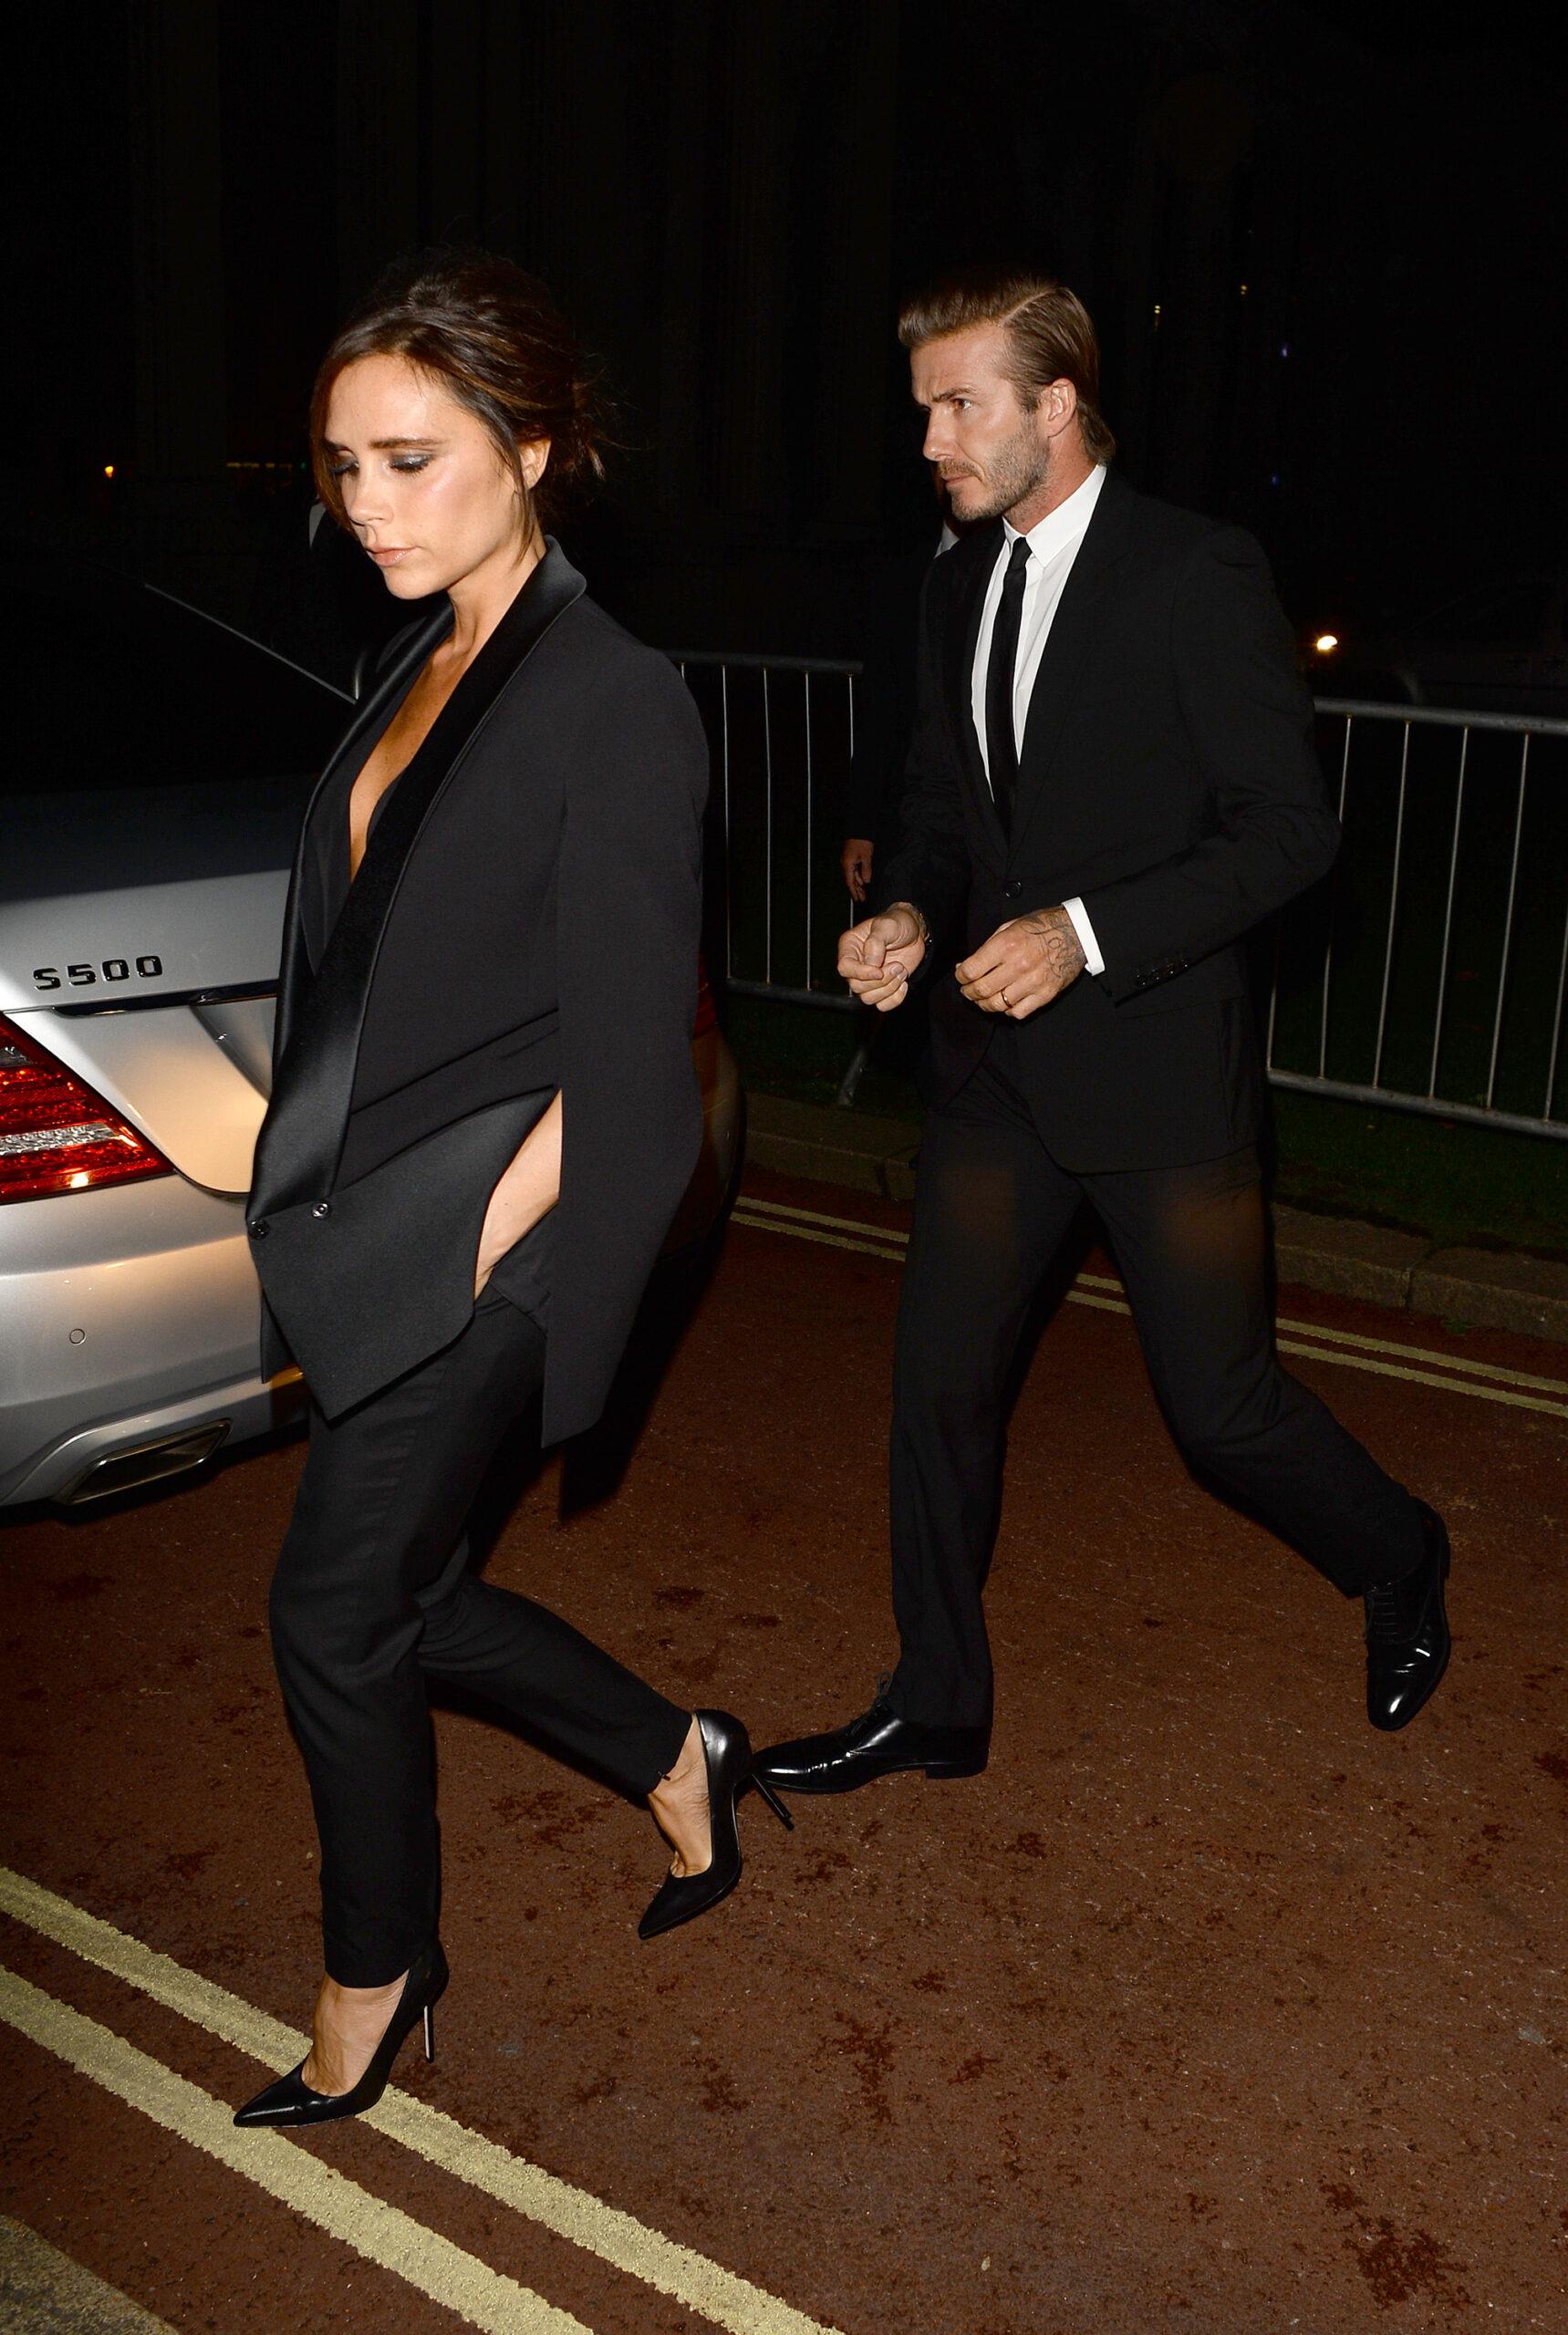 Victoria Beckham and David Beckham at the London Fashion Week s/s 2014 Fashion Council party